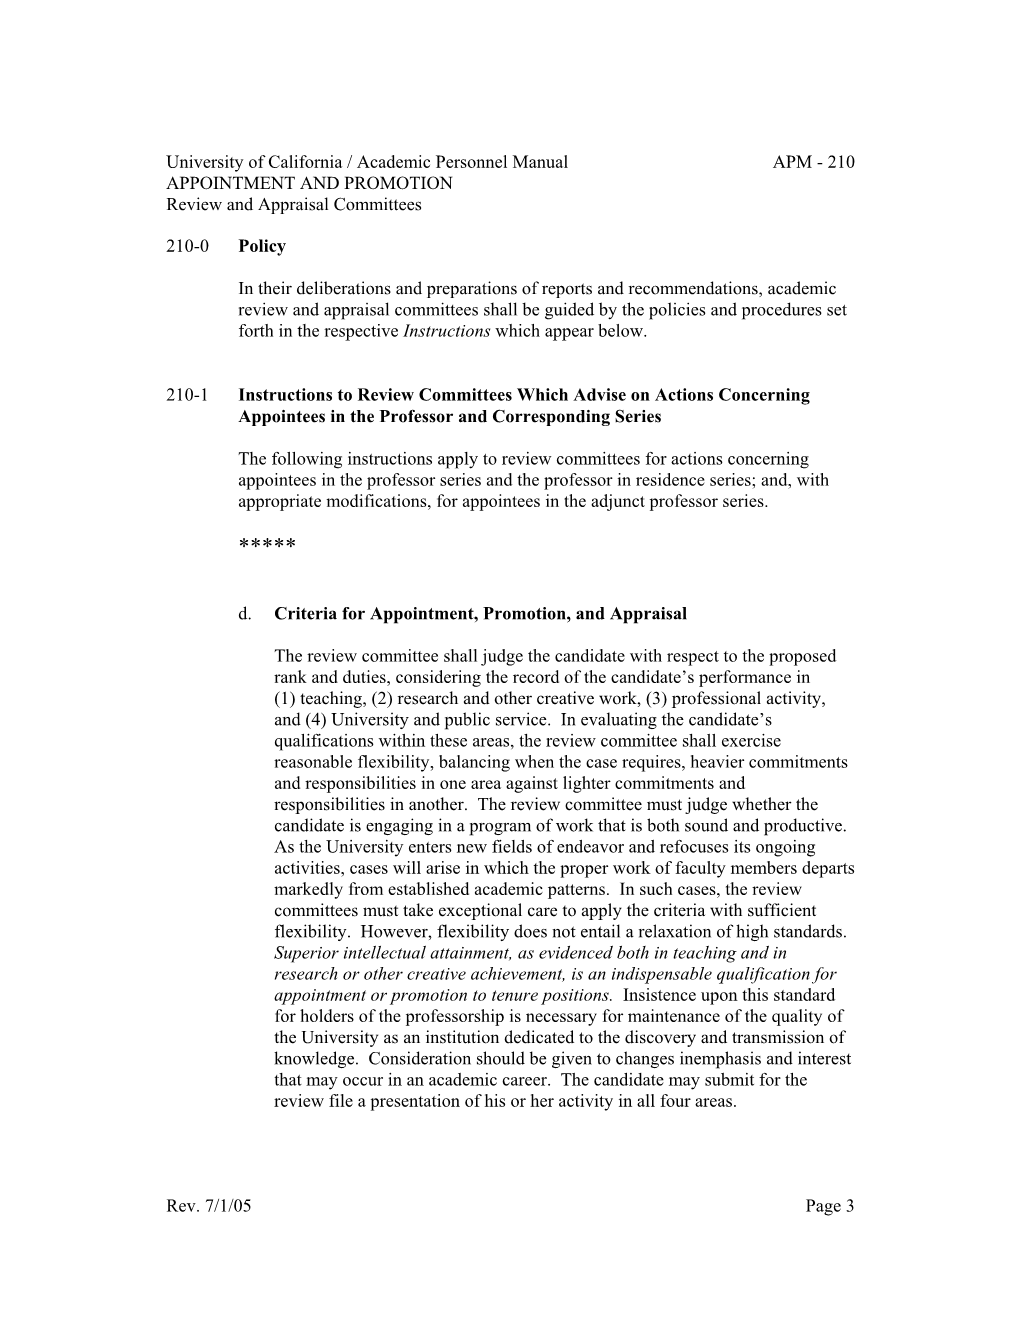 University of California / Academic Personnel Manual APM - 210 APPOINTMENT and PROMOTION Review and Appraisal Committees